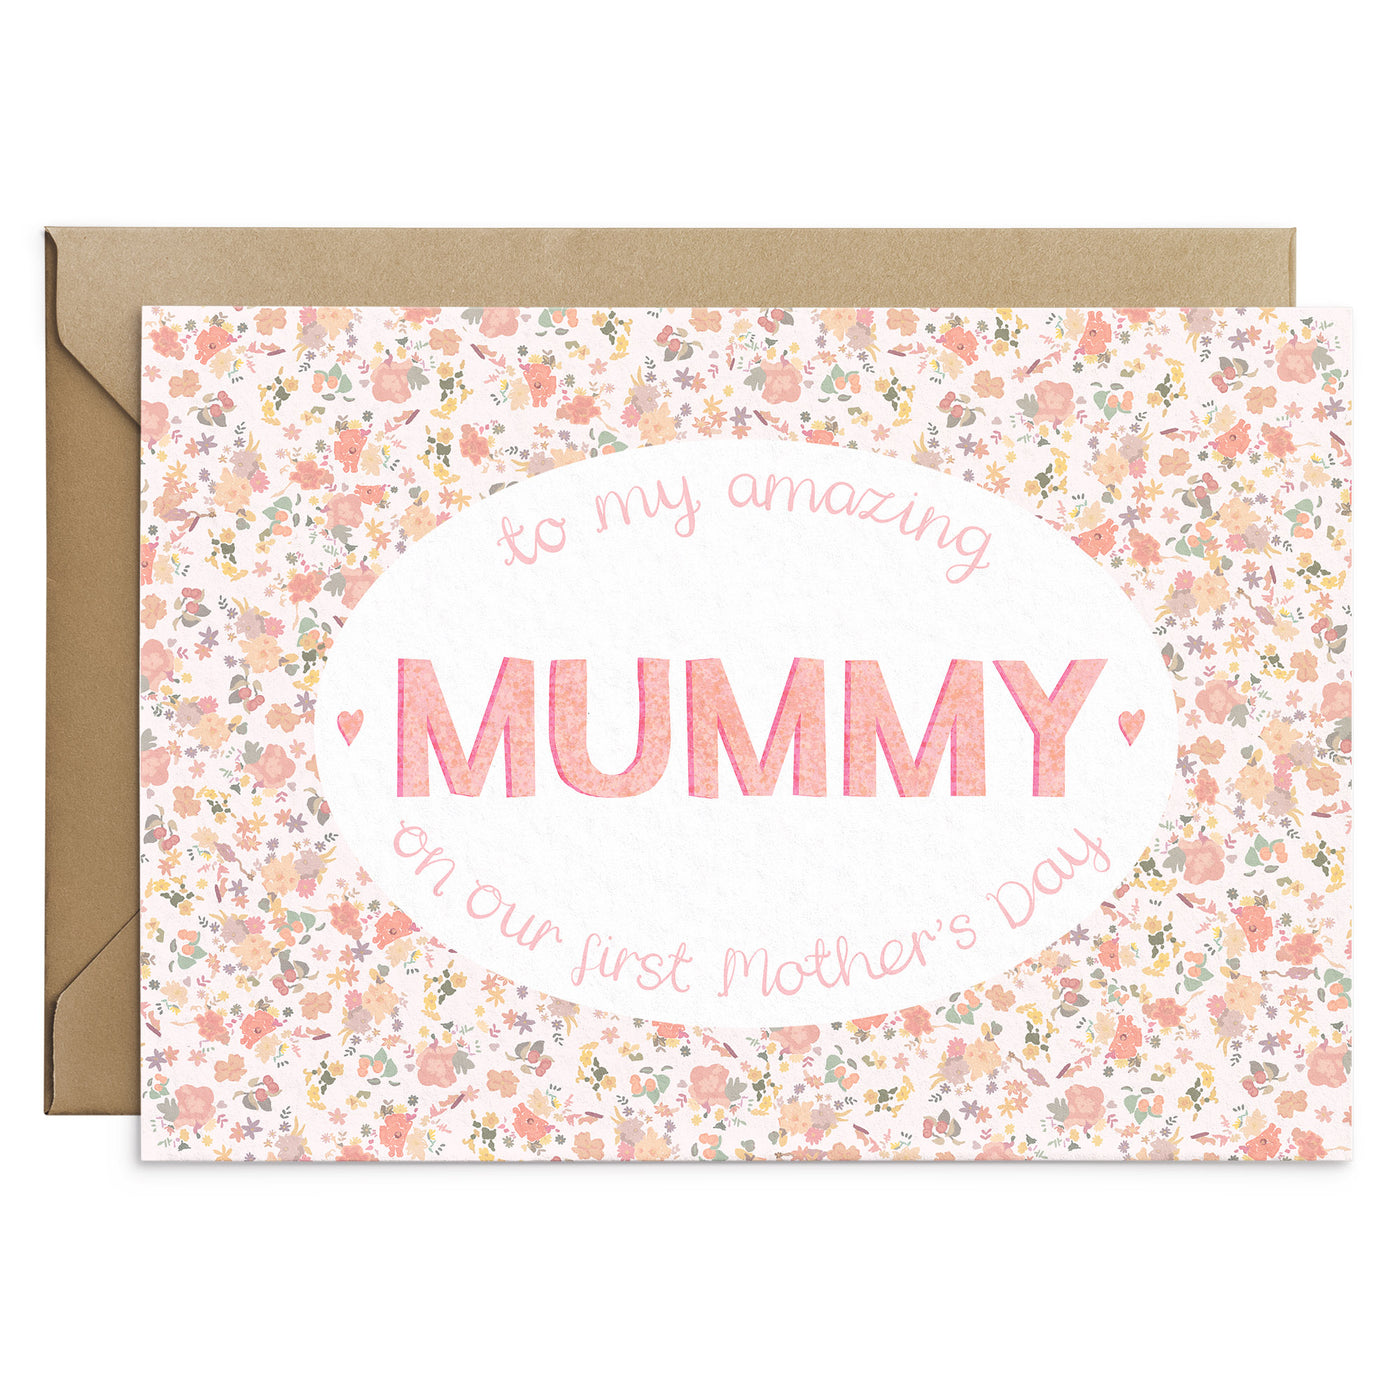 Amazing Mummy First Mothers Day Card - Poppins & Co.